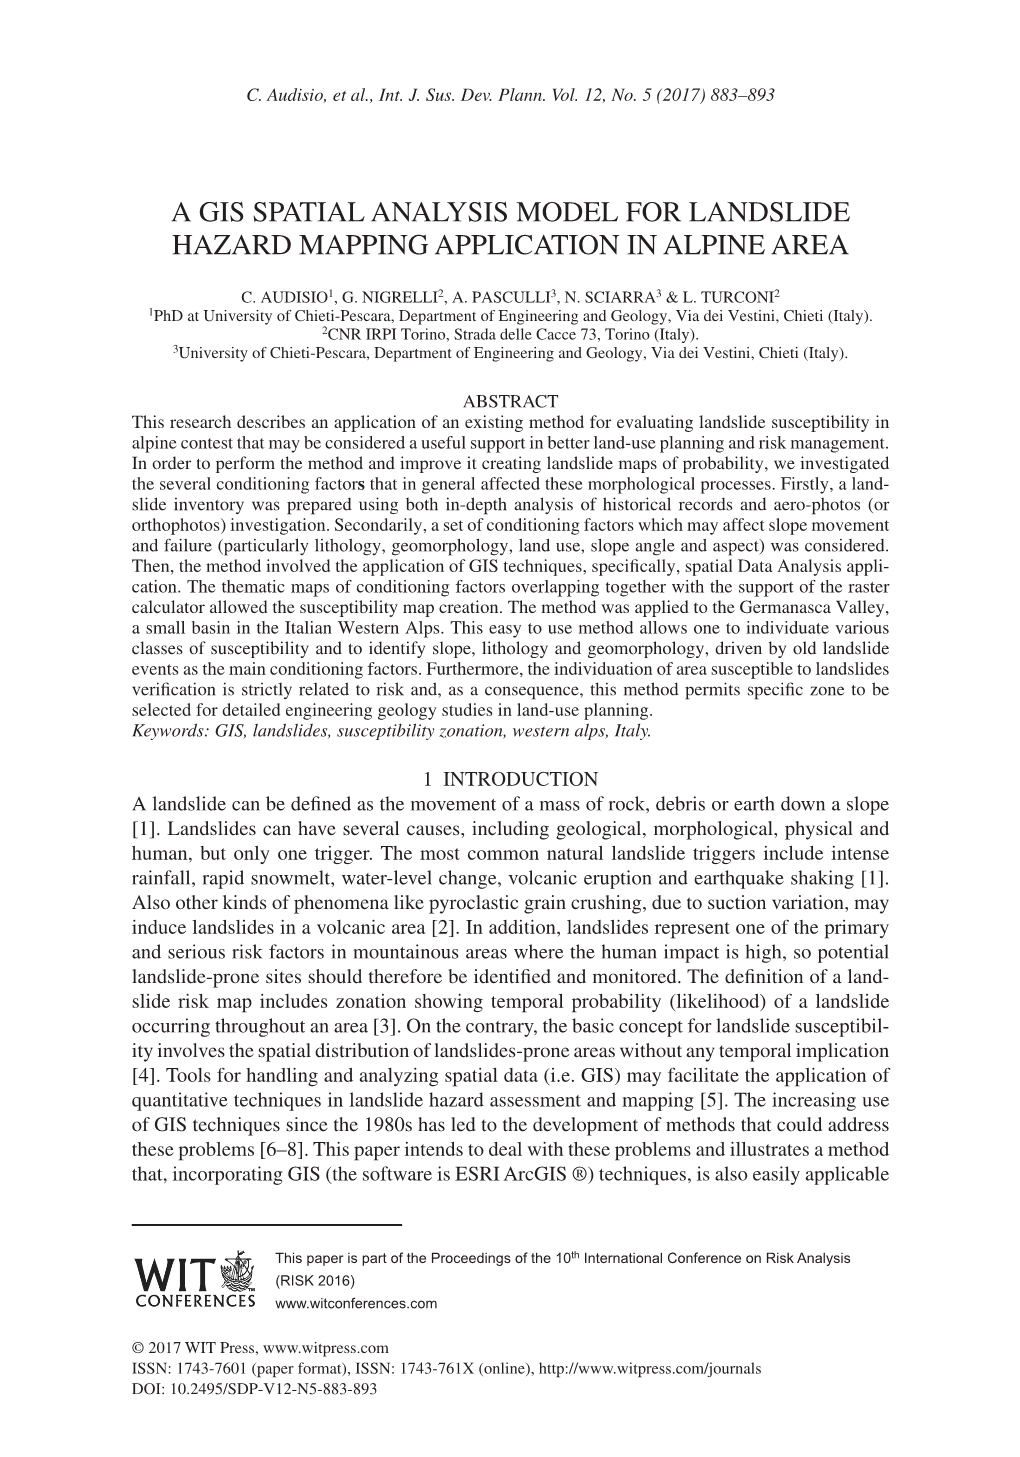 A Gis Spatial Analysis Model for Landslide Hazard Mapping Application in Alpine Area